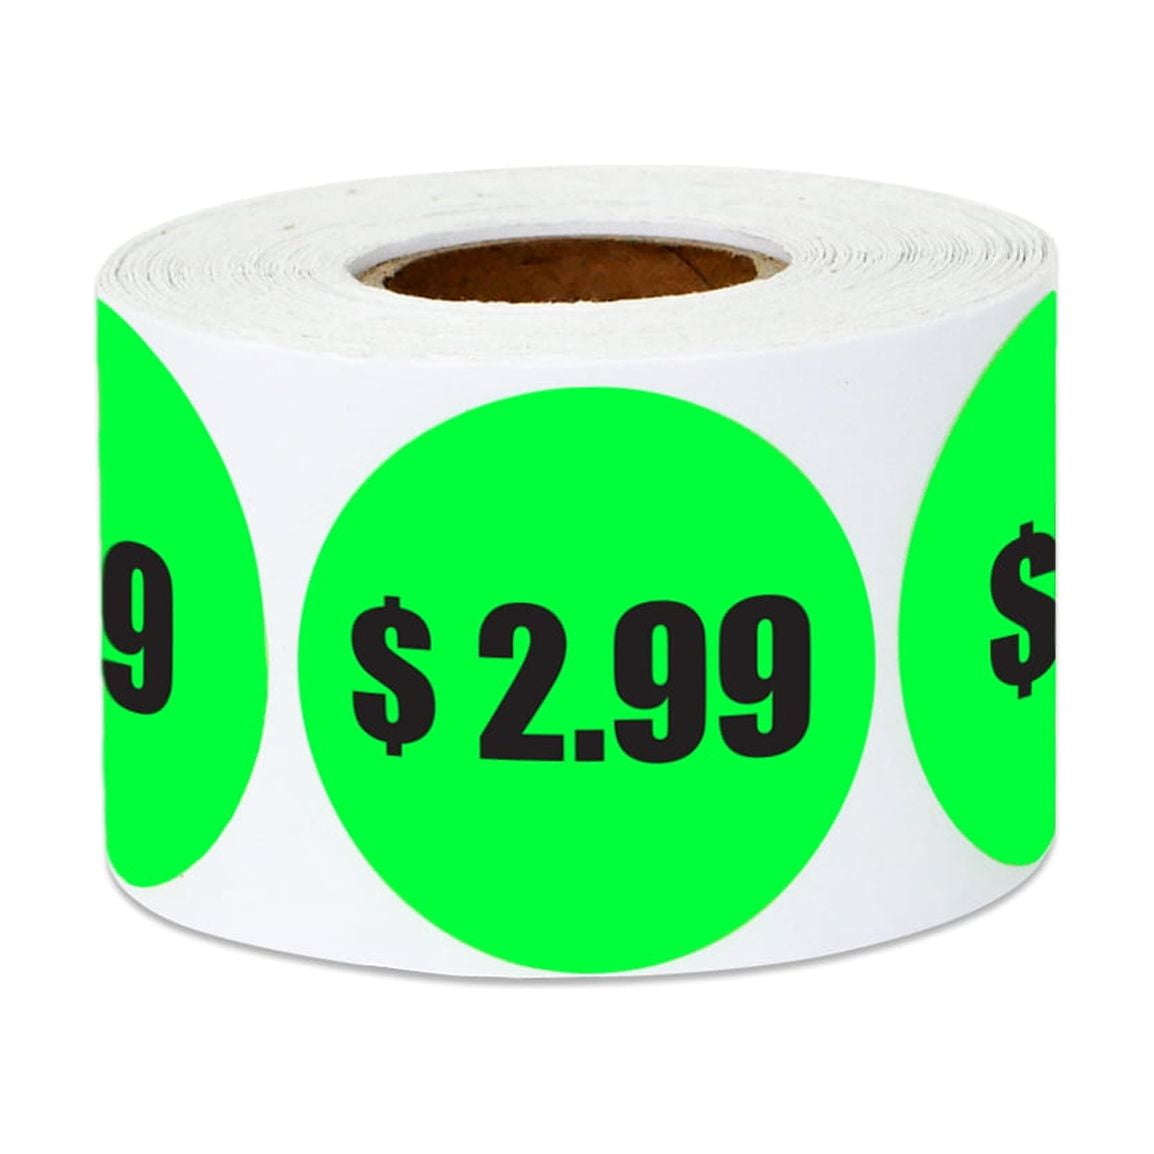 1.5 Round $2.99 Two Dollars & 99 Cents Pricing Stickers Labels for Retail  Pricing, Sales or Yard Sales (10 Rolls / Green) 